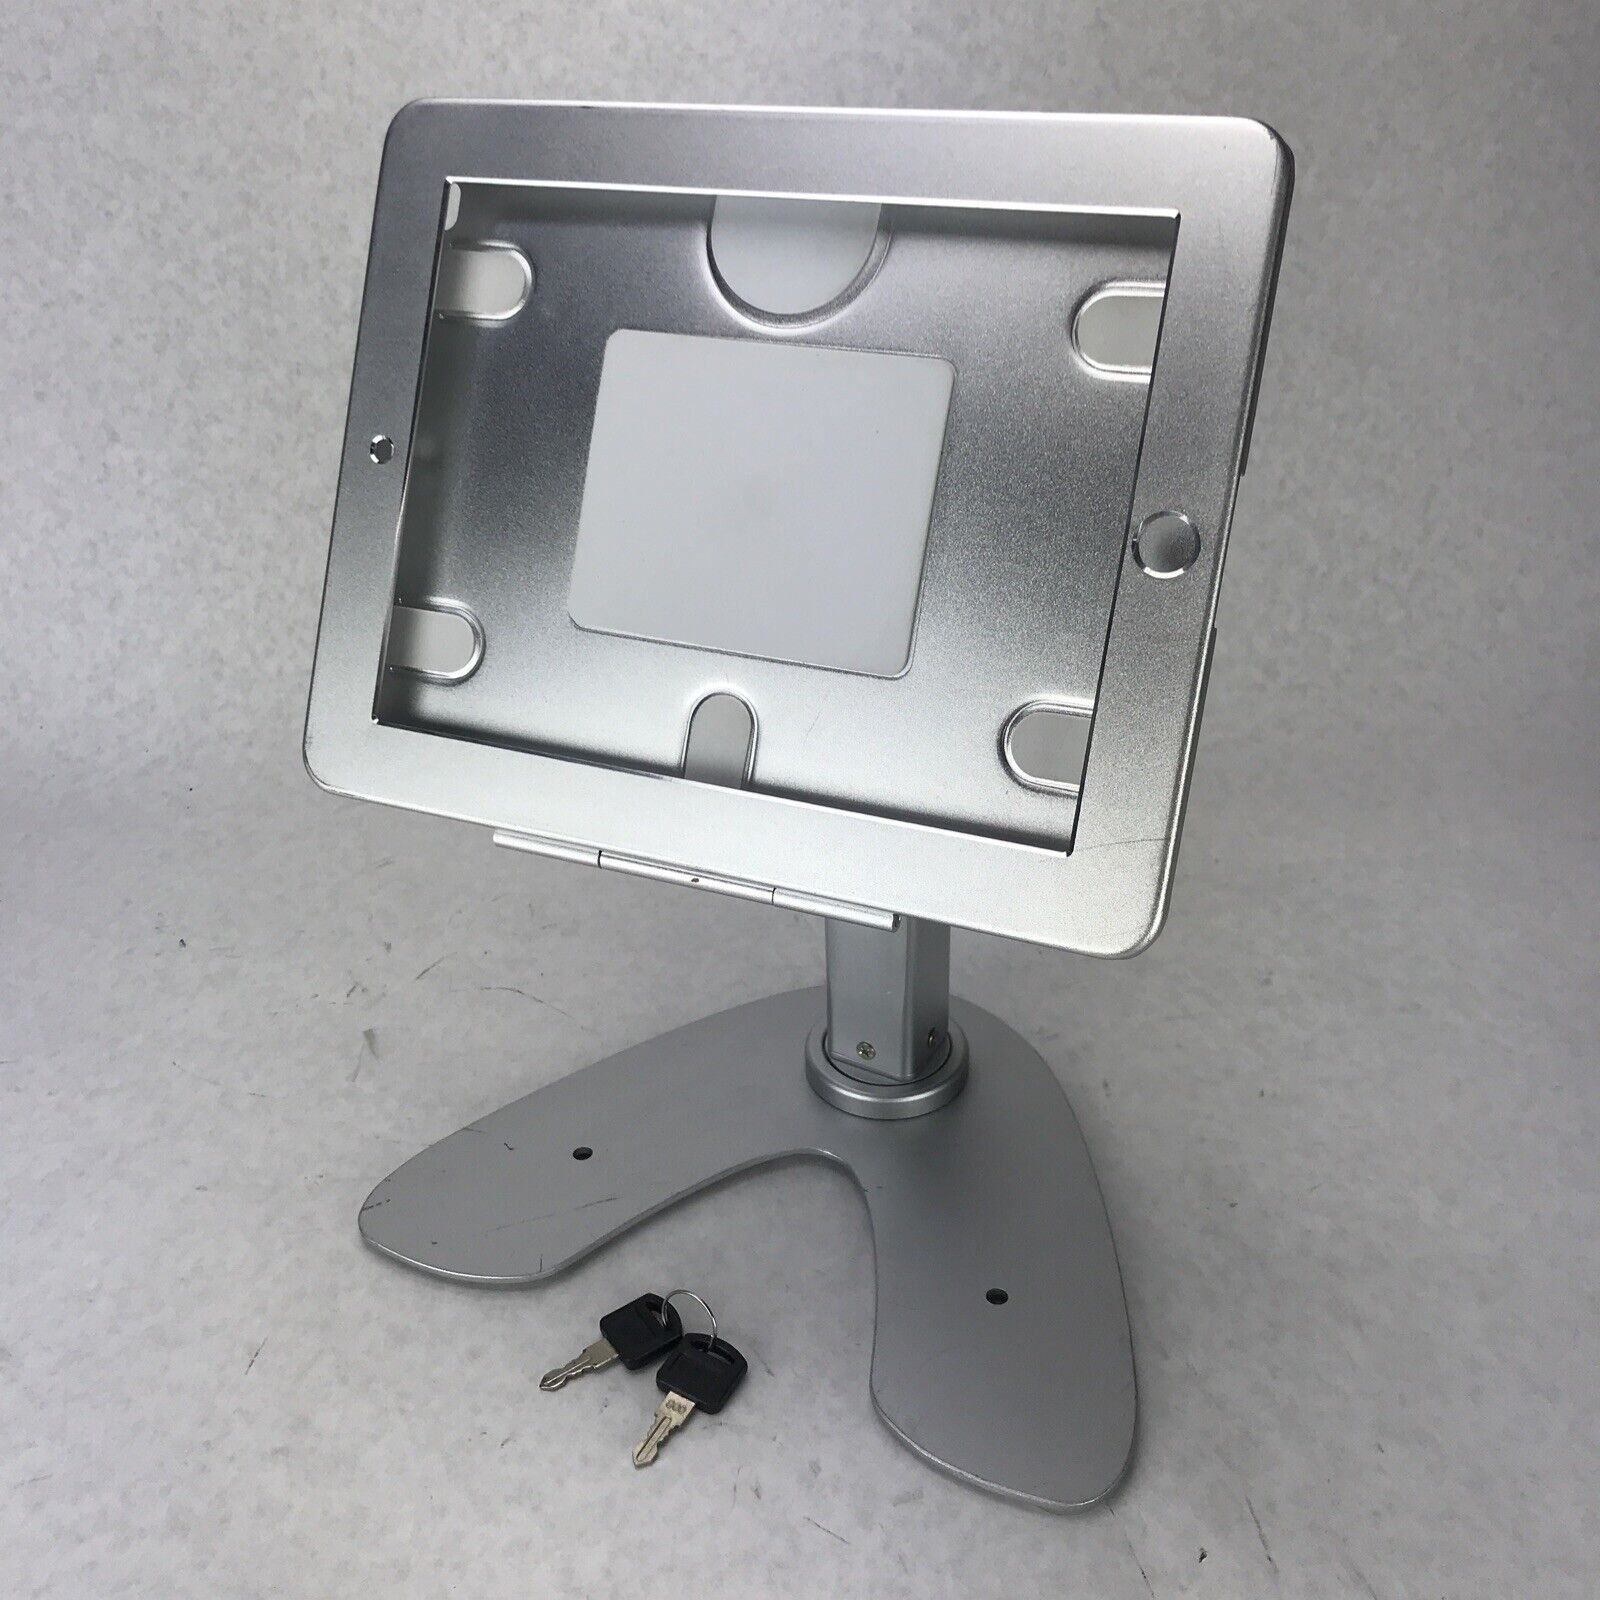 Anti-Theft Lockable Secure Kiosk Tablet Stand Enclosure with Key 9.5" x 7.375"